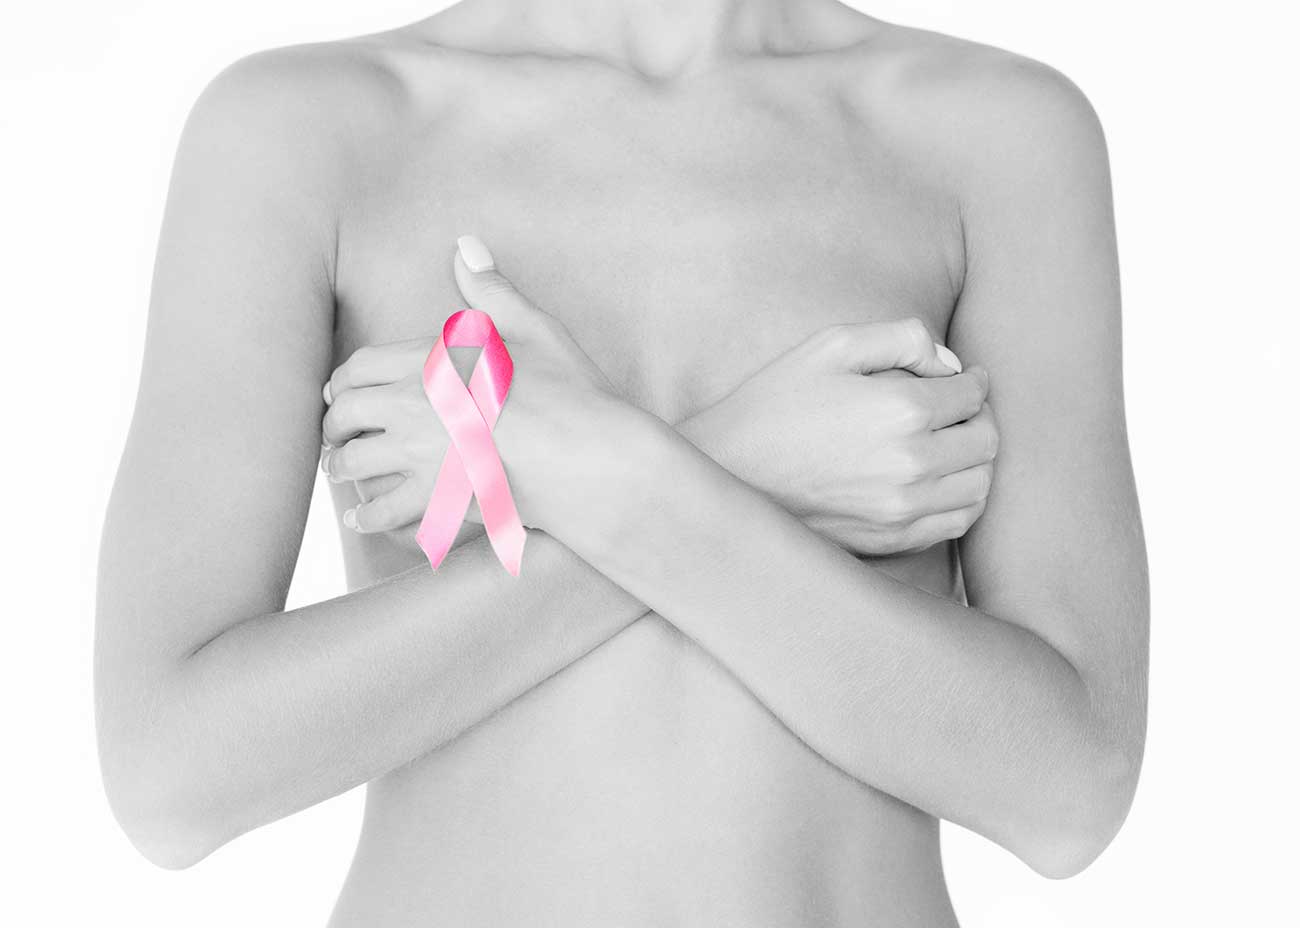 Why breast cancer gets so much attention